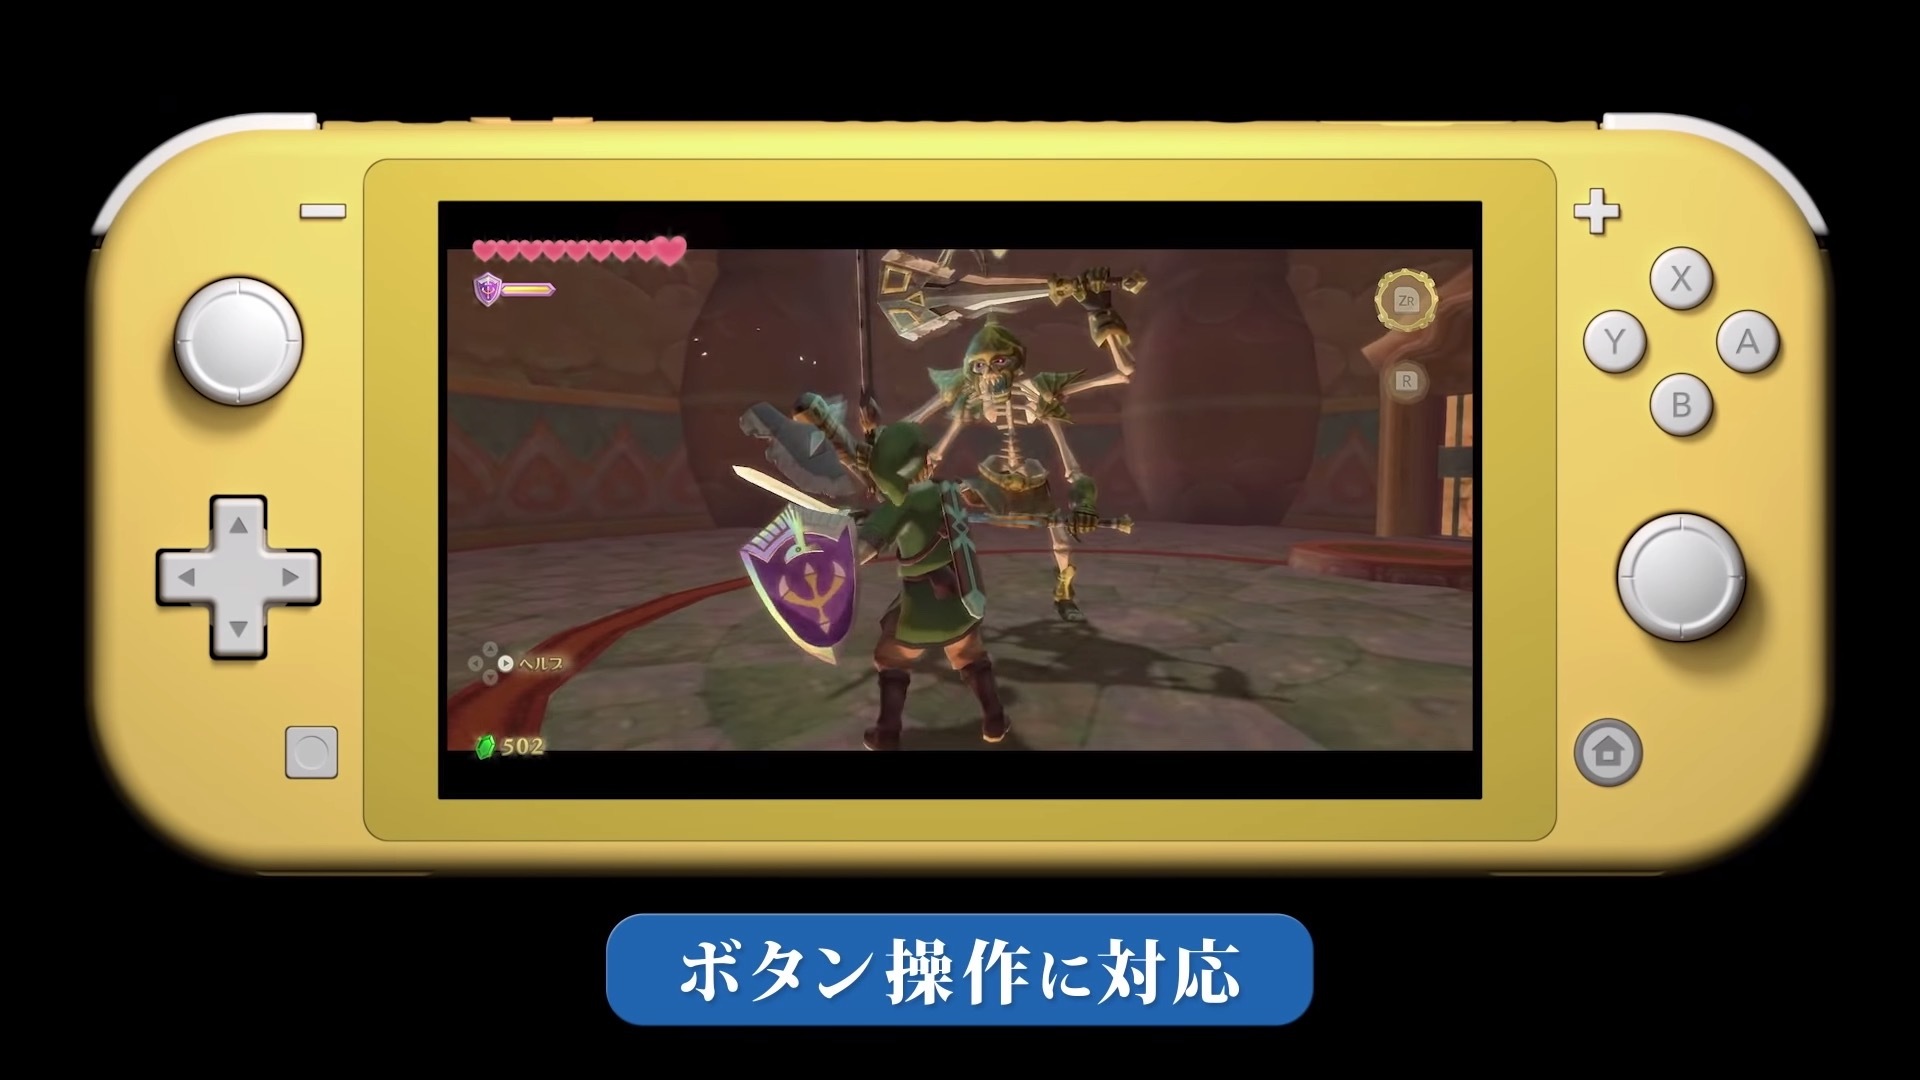 Flash News The Legend Of Zelda Sword In The Sky Confirmed On Switch Add Pure Button Control Gameplay The Legend Of Zelda Skyward Sword World Today News